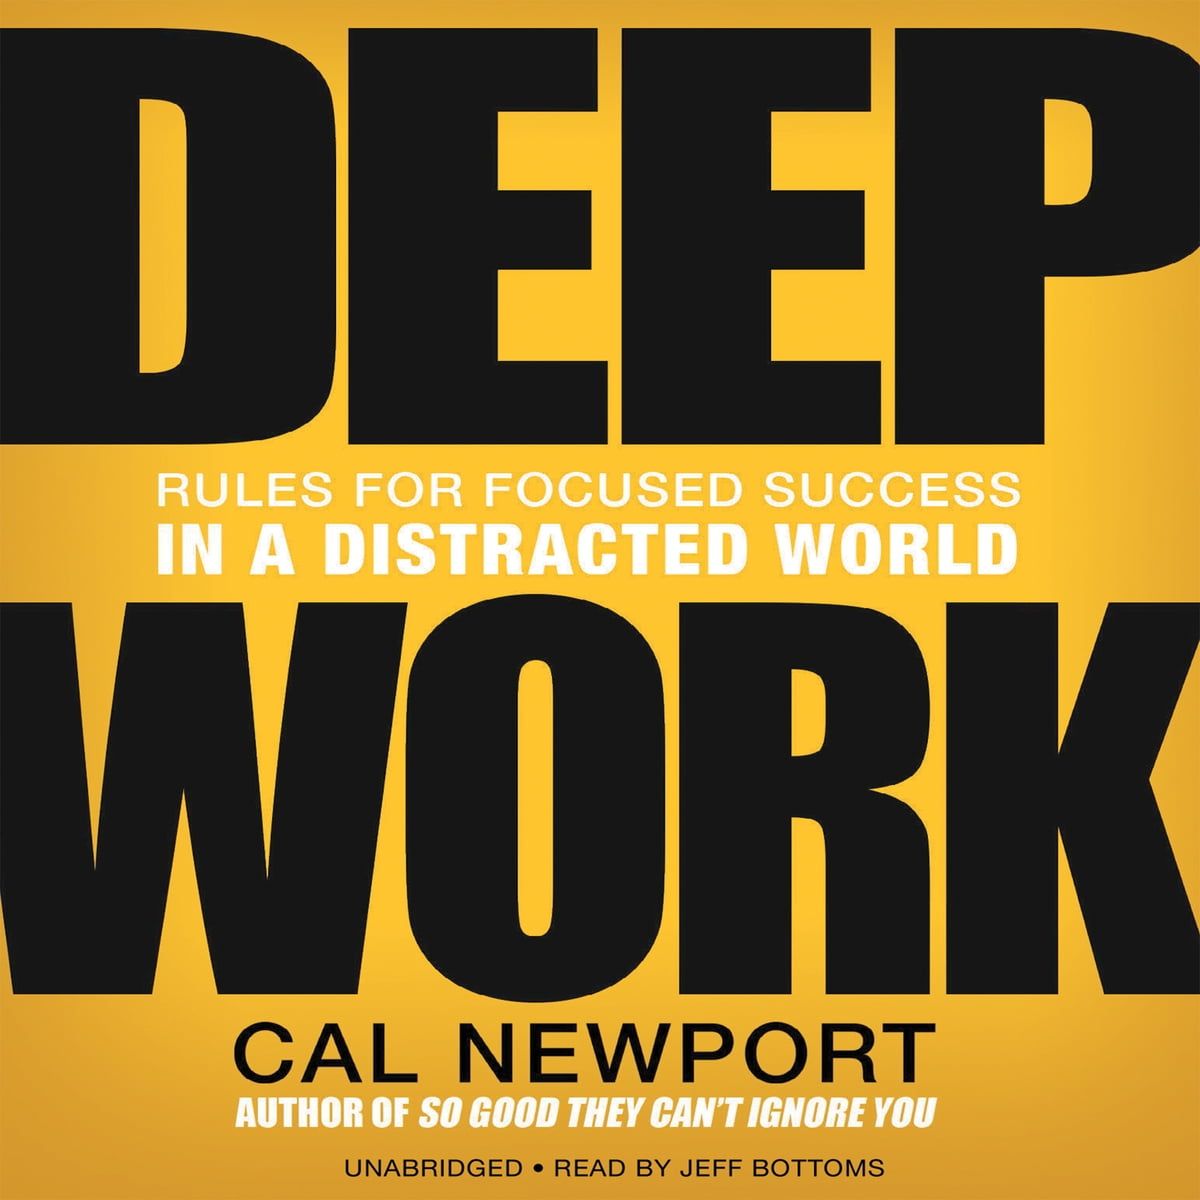 Notes and Reflections on “Deep Work” by Cal Newport